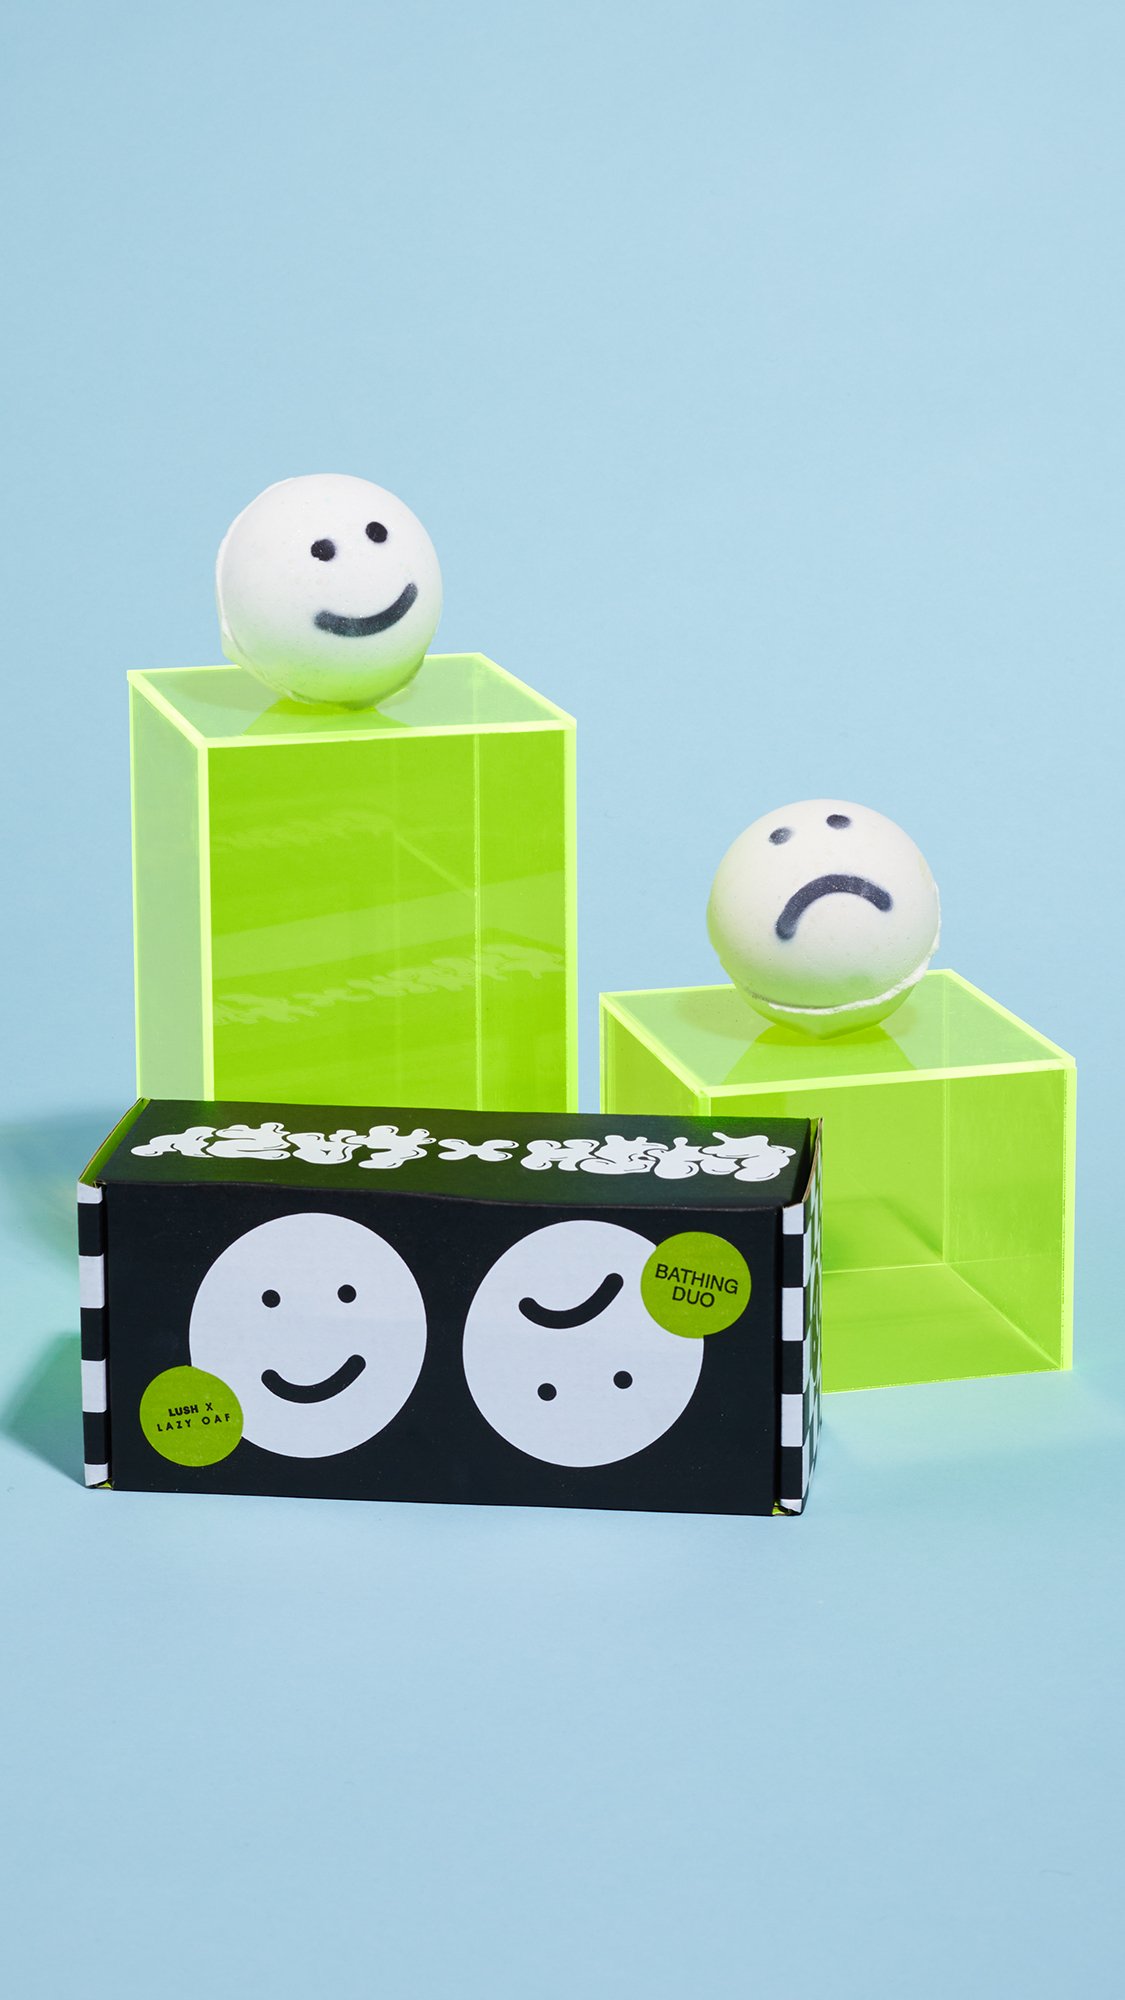 Happy Face and Sad Face sit upon green boxes, above a black, white and green packaging box. In front of a light blue background.